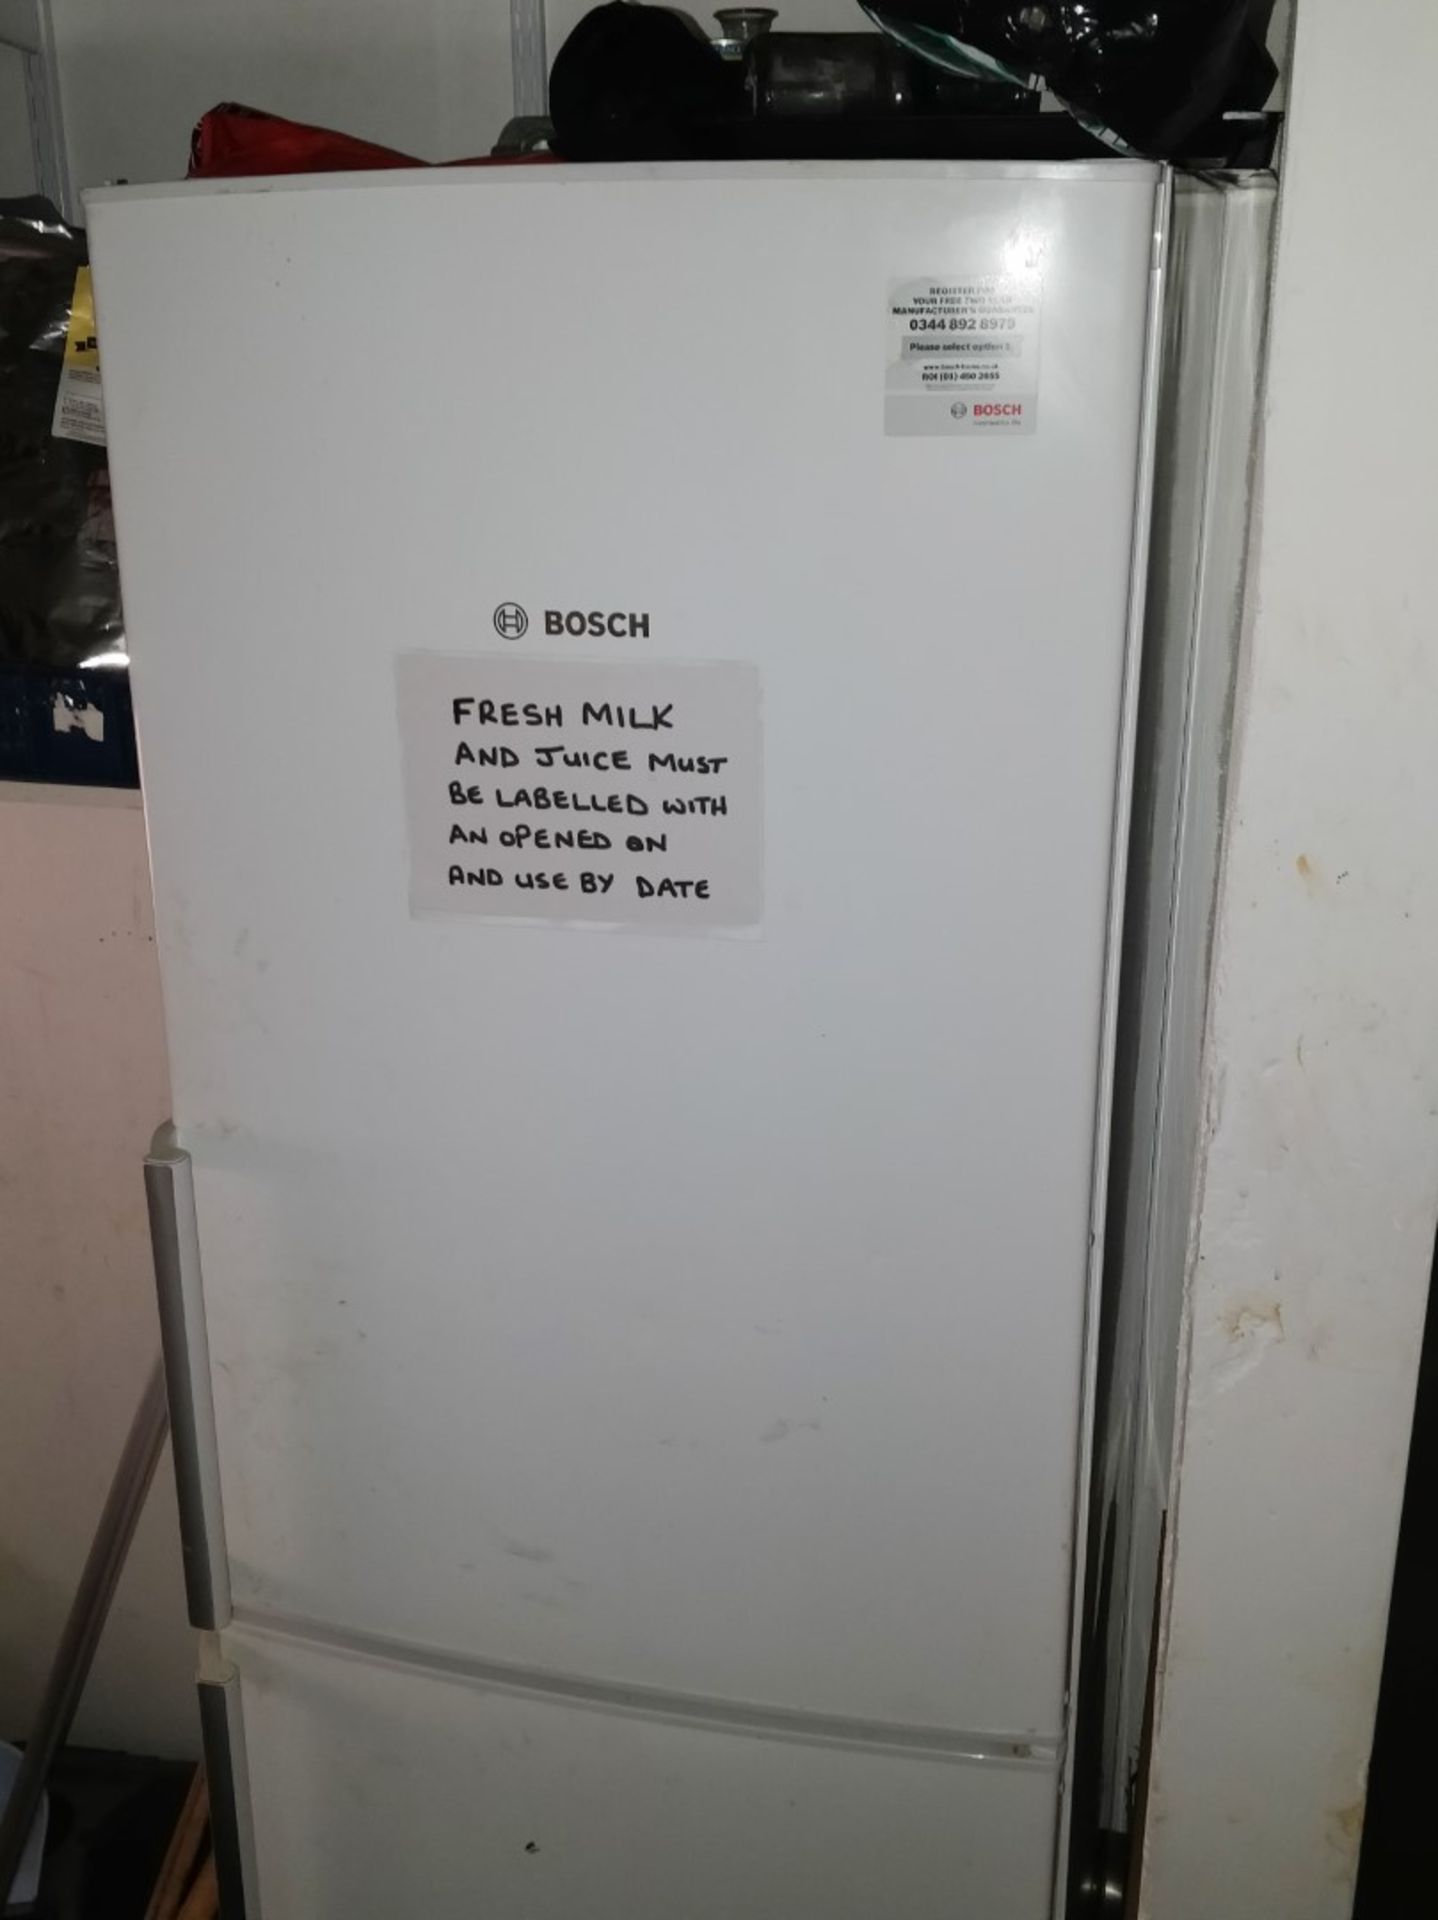 1 x Bosch Upright Fridge Freezer - CL586 - Location: Stockport SK1 This item is to be removed from a